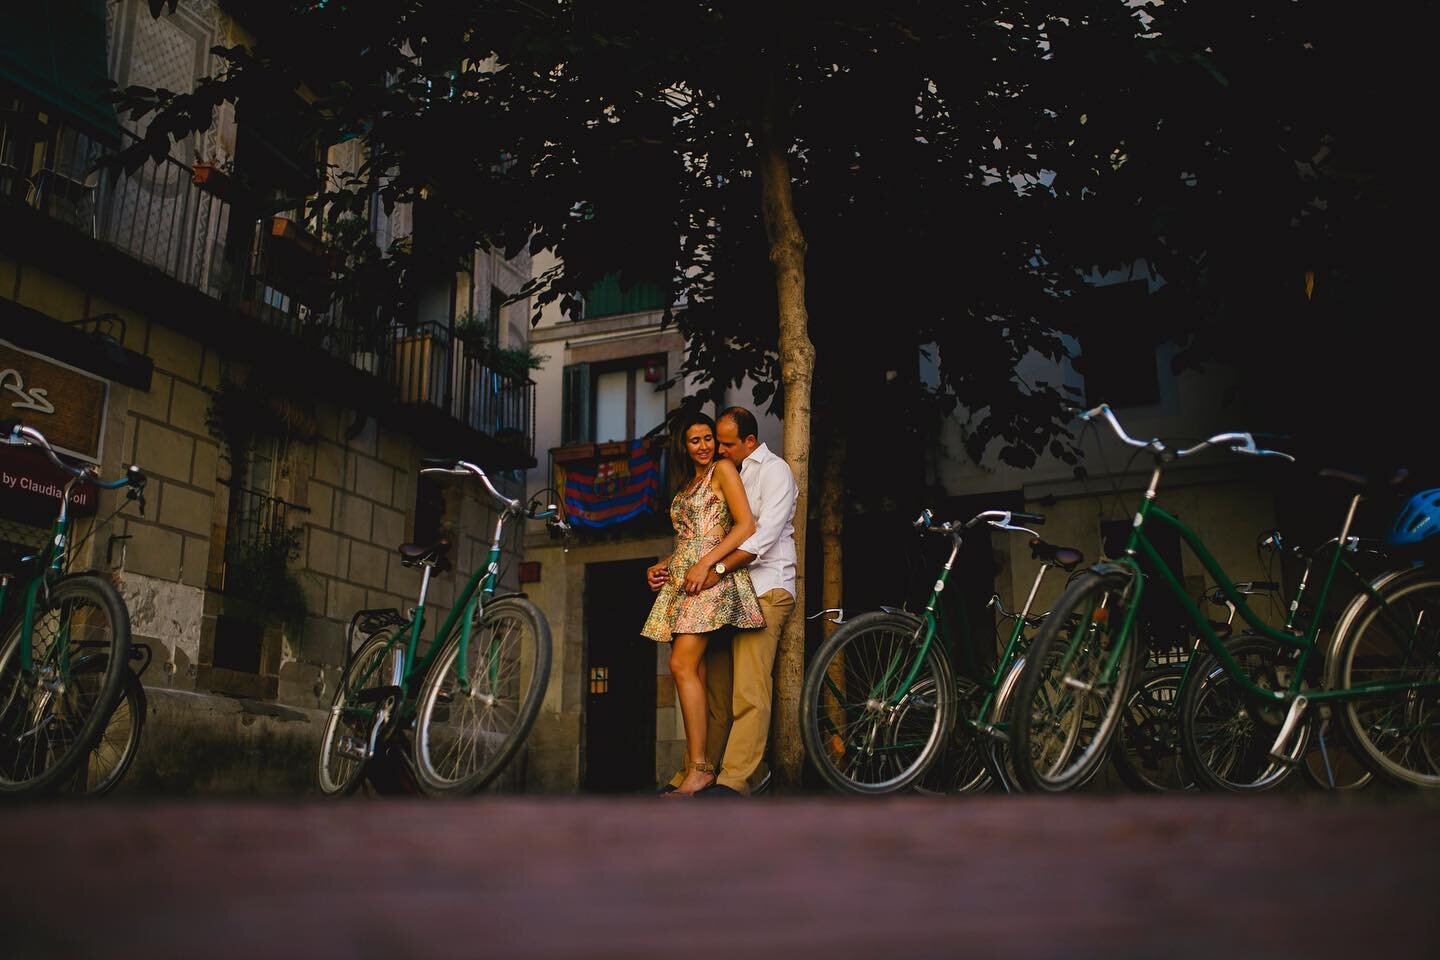 A perfect day for lovers, excited for me, always fun, photography is more than this ⚡️

#engagementbarcelona #barcelonaweddingphotographer #bridetobe #couplesession #fotografobodasbarcelona #orlanrivera #bcnweddings